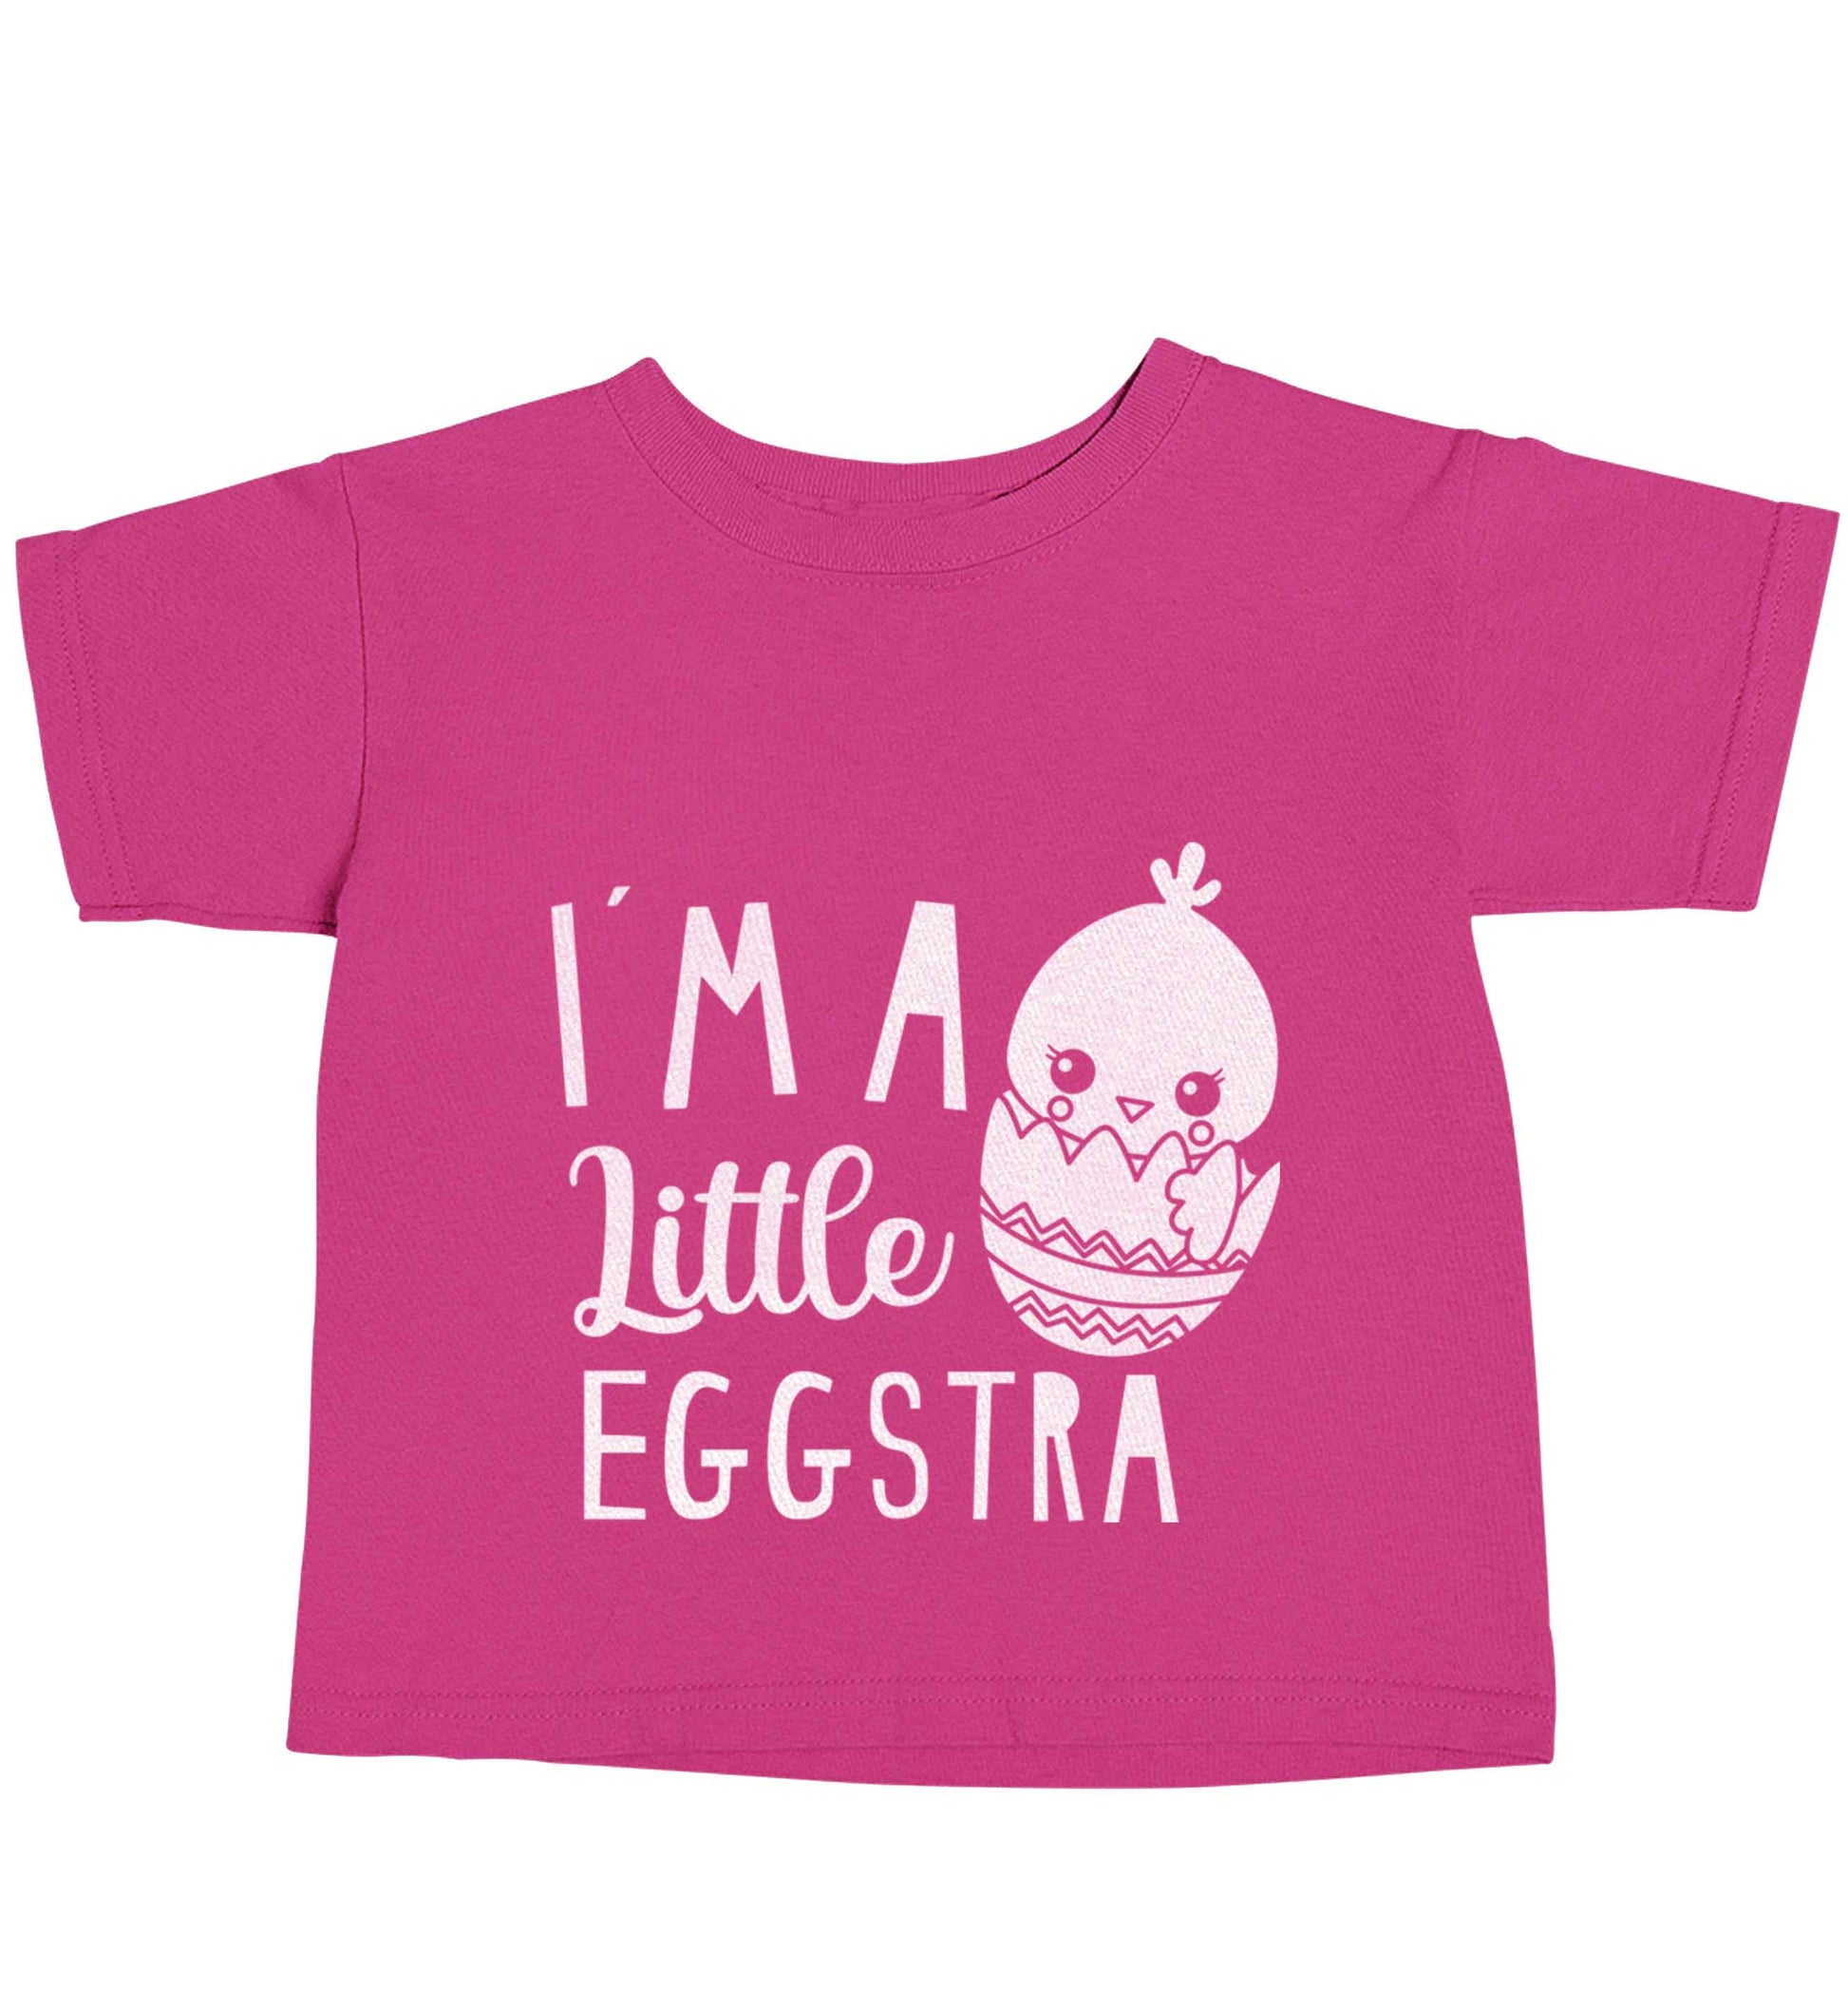 I'm a little eggstra pink baby toddler Tshirt 2 Years